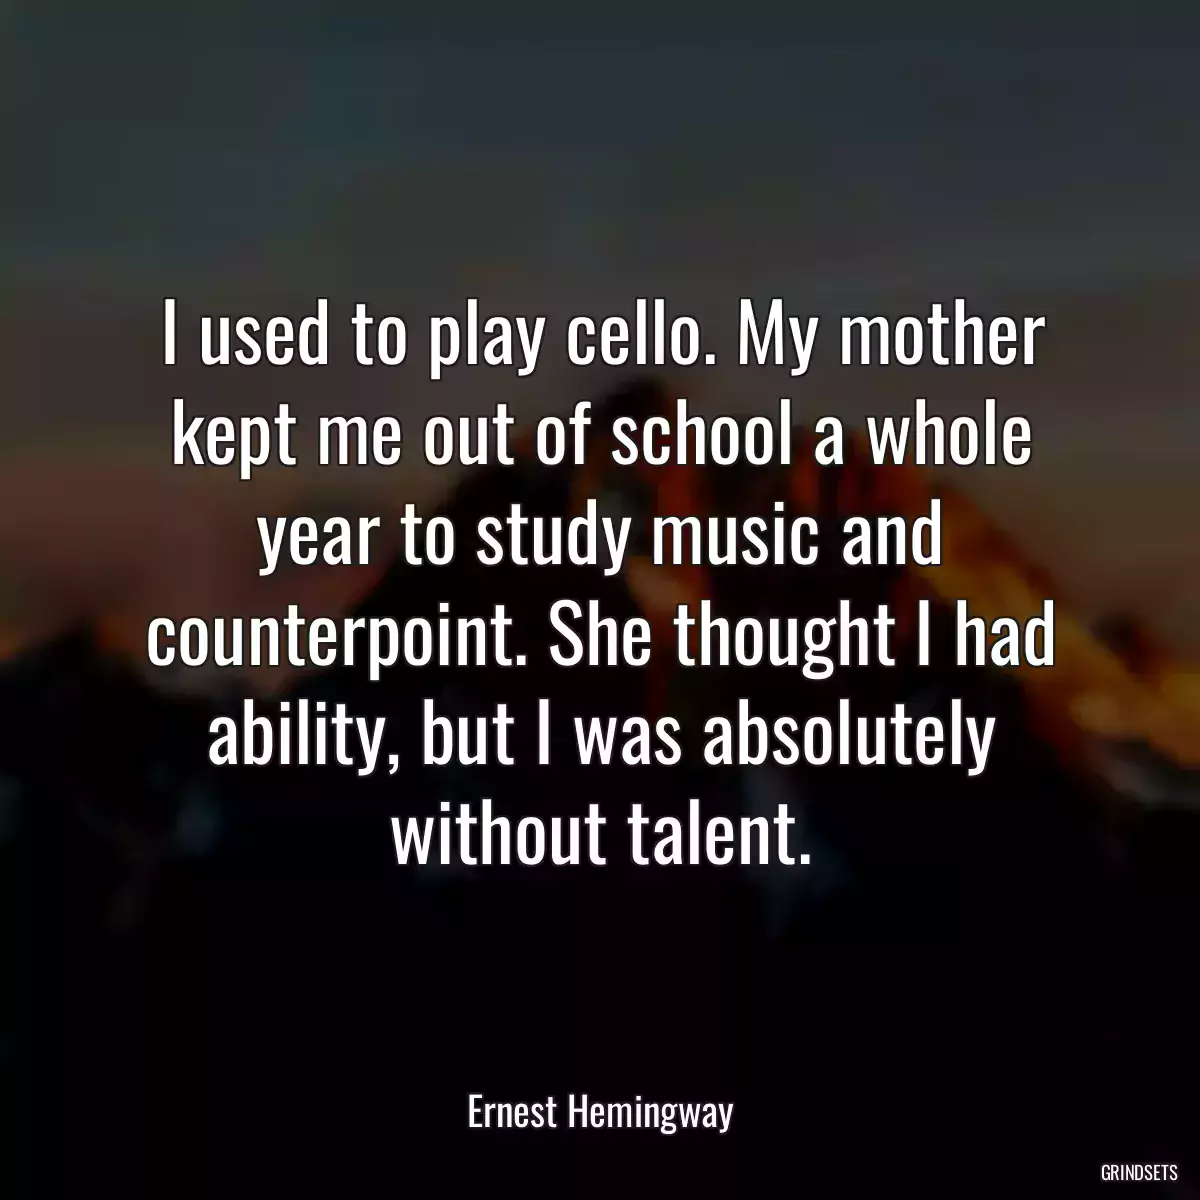 I used to play cello. My mother kept me out of school a whole year to study music and counterpoint. She thought I had ability, but I was absolutely without talent.